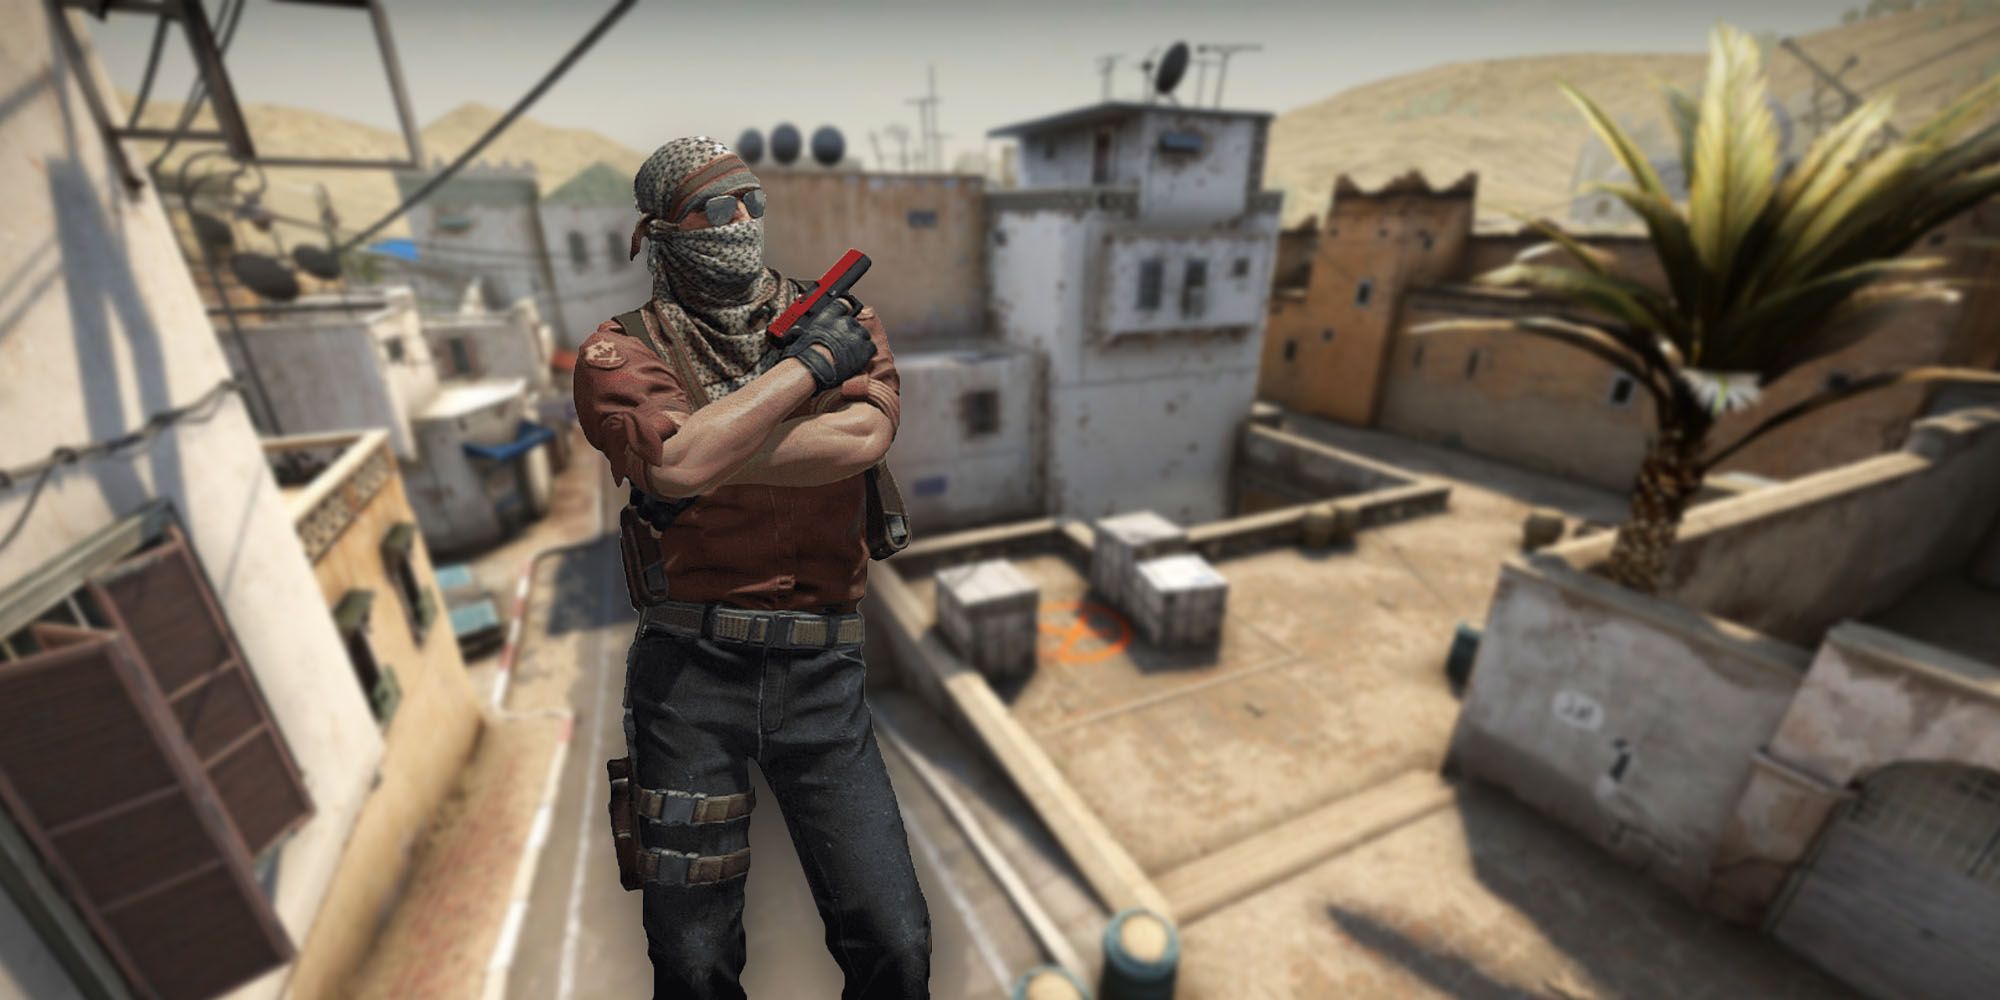 sensitivity cart strong Tips and Tricks On Dust2 That You Should Know In CS:GO